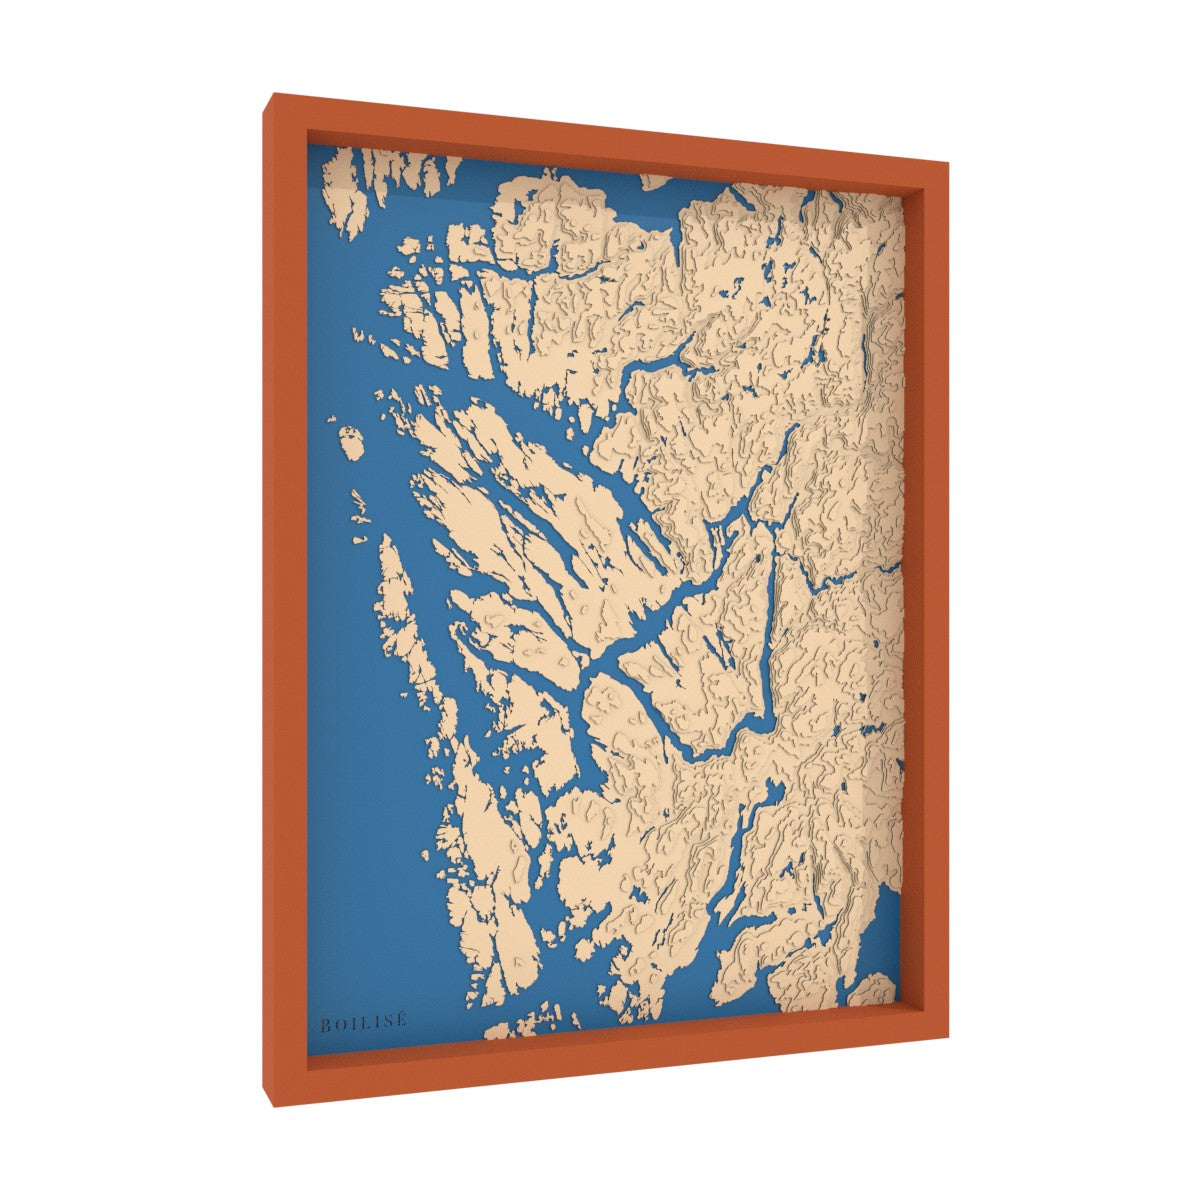 Map of Bergen in the heart of the fjords